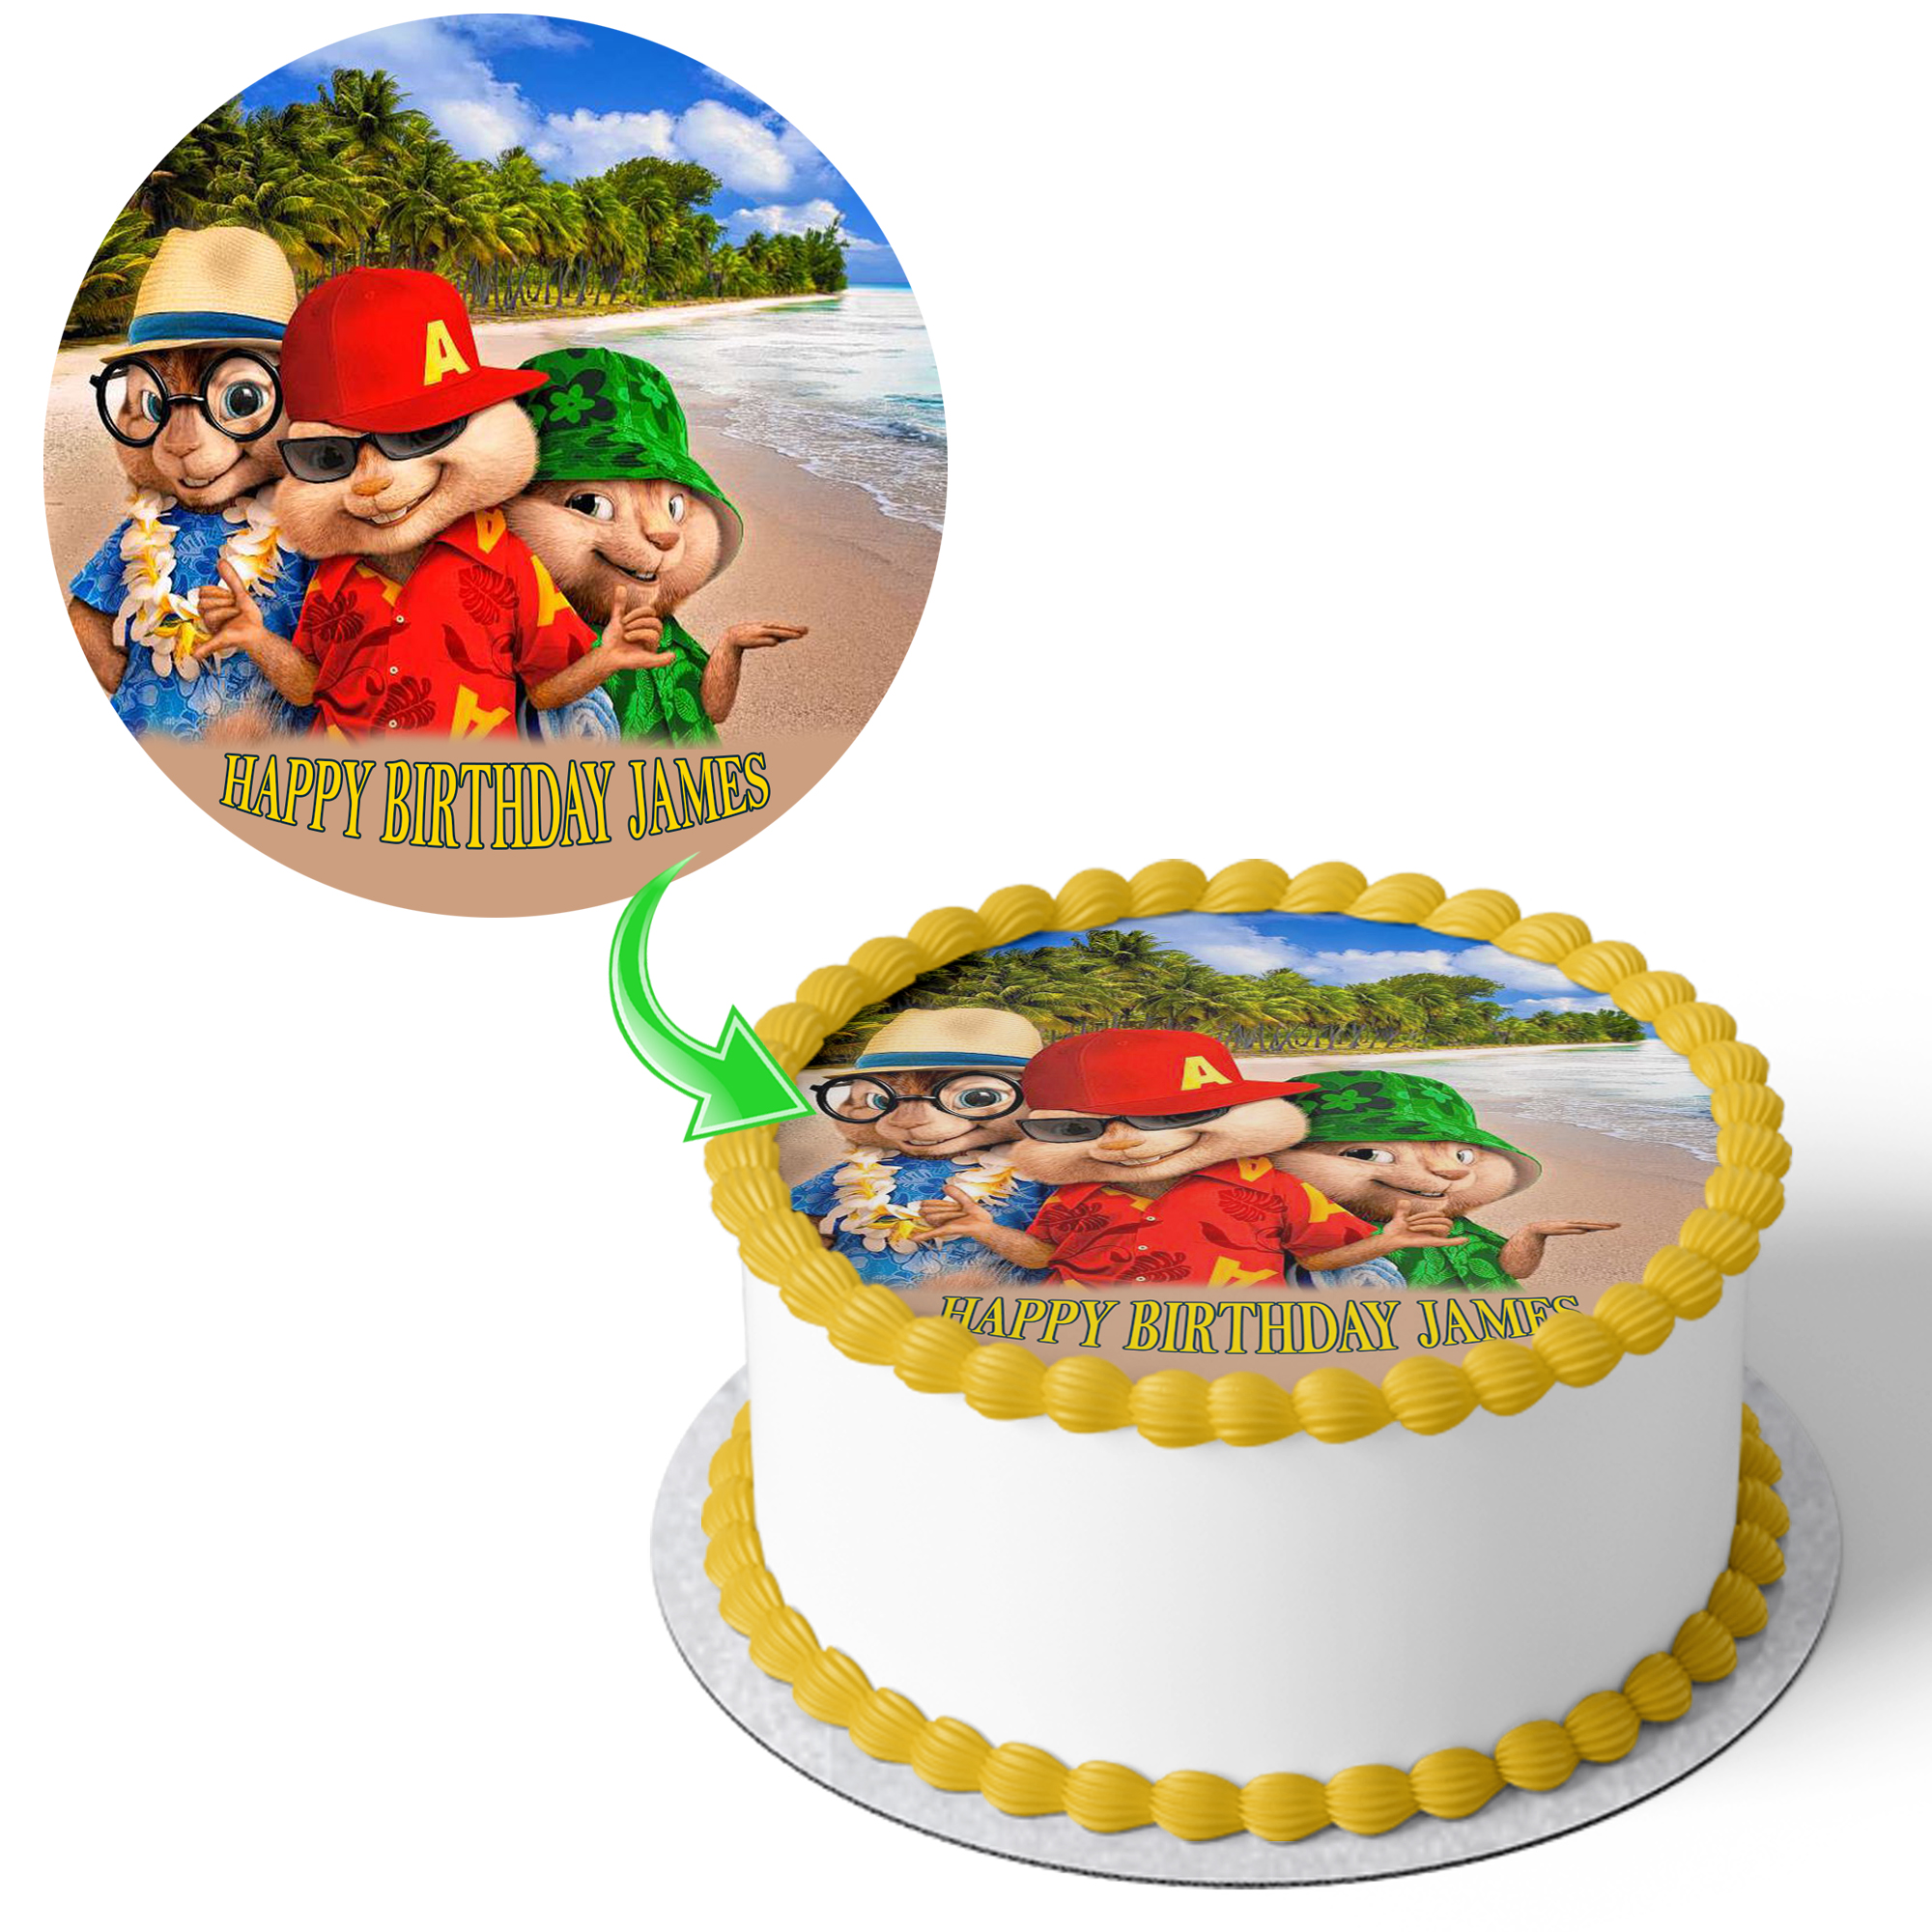 Alvin and the chipmunk cake